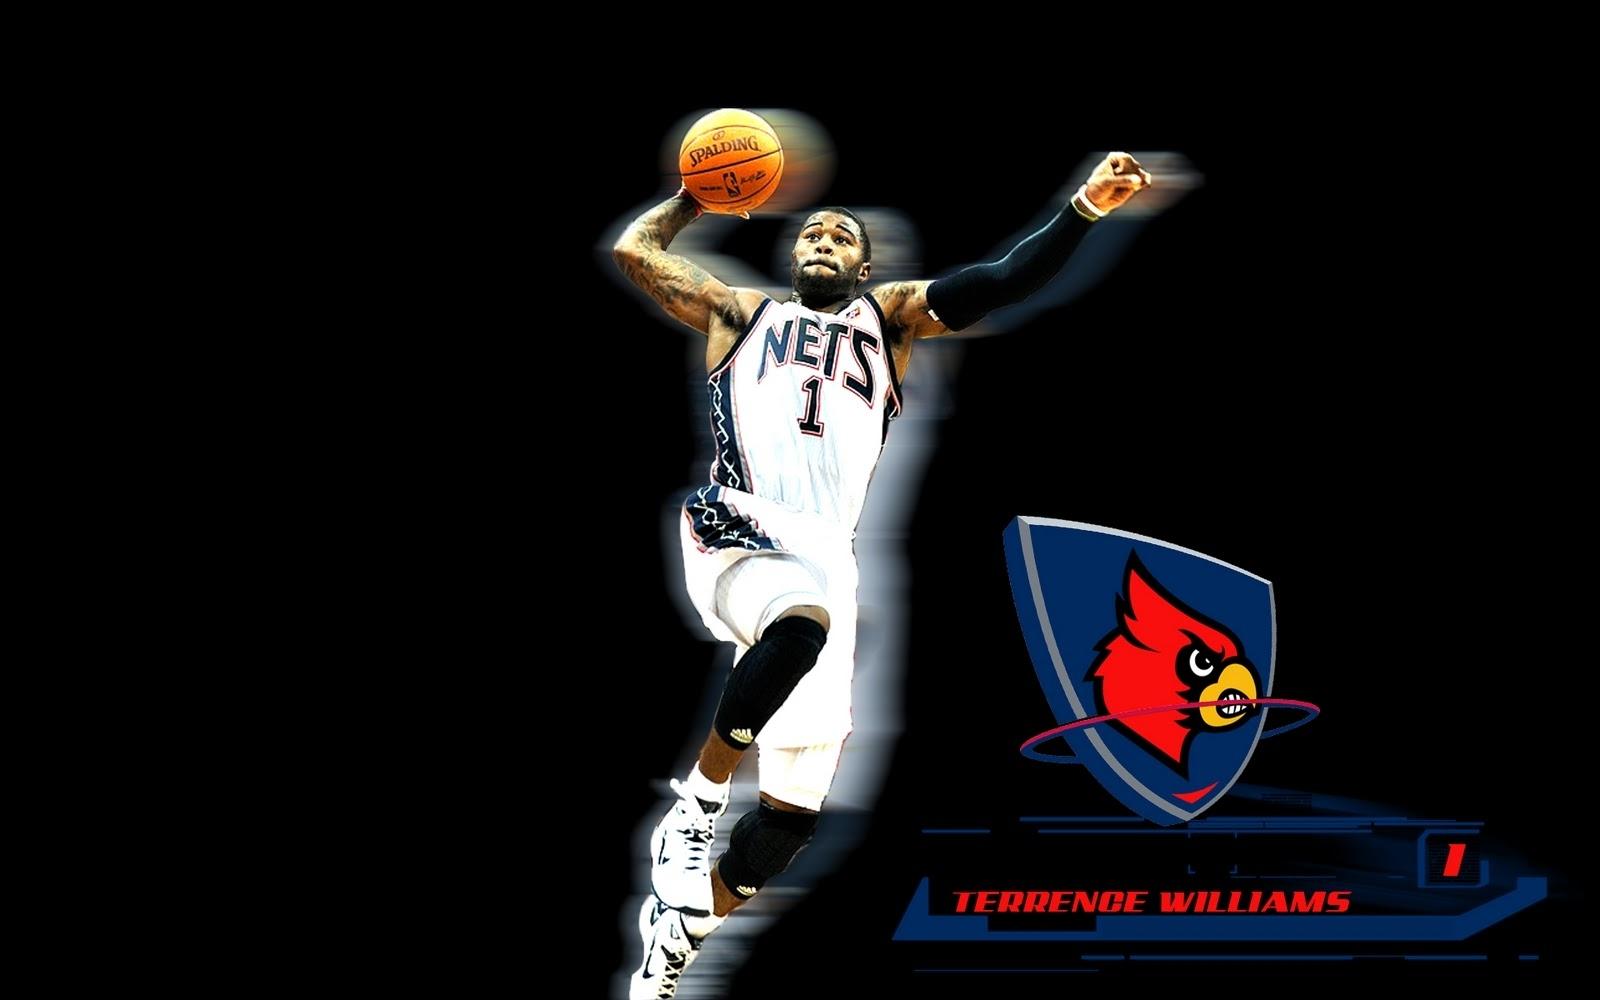 Top Wallpaper Of Basketball Players FULL HD 1080p For PC